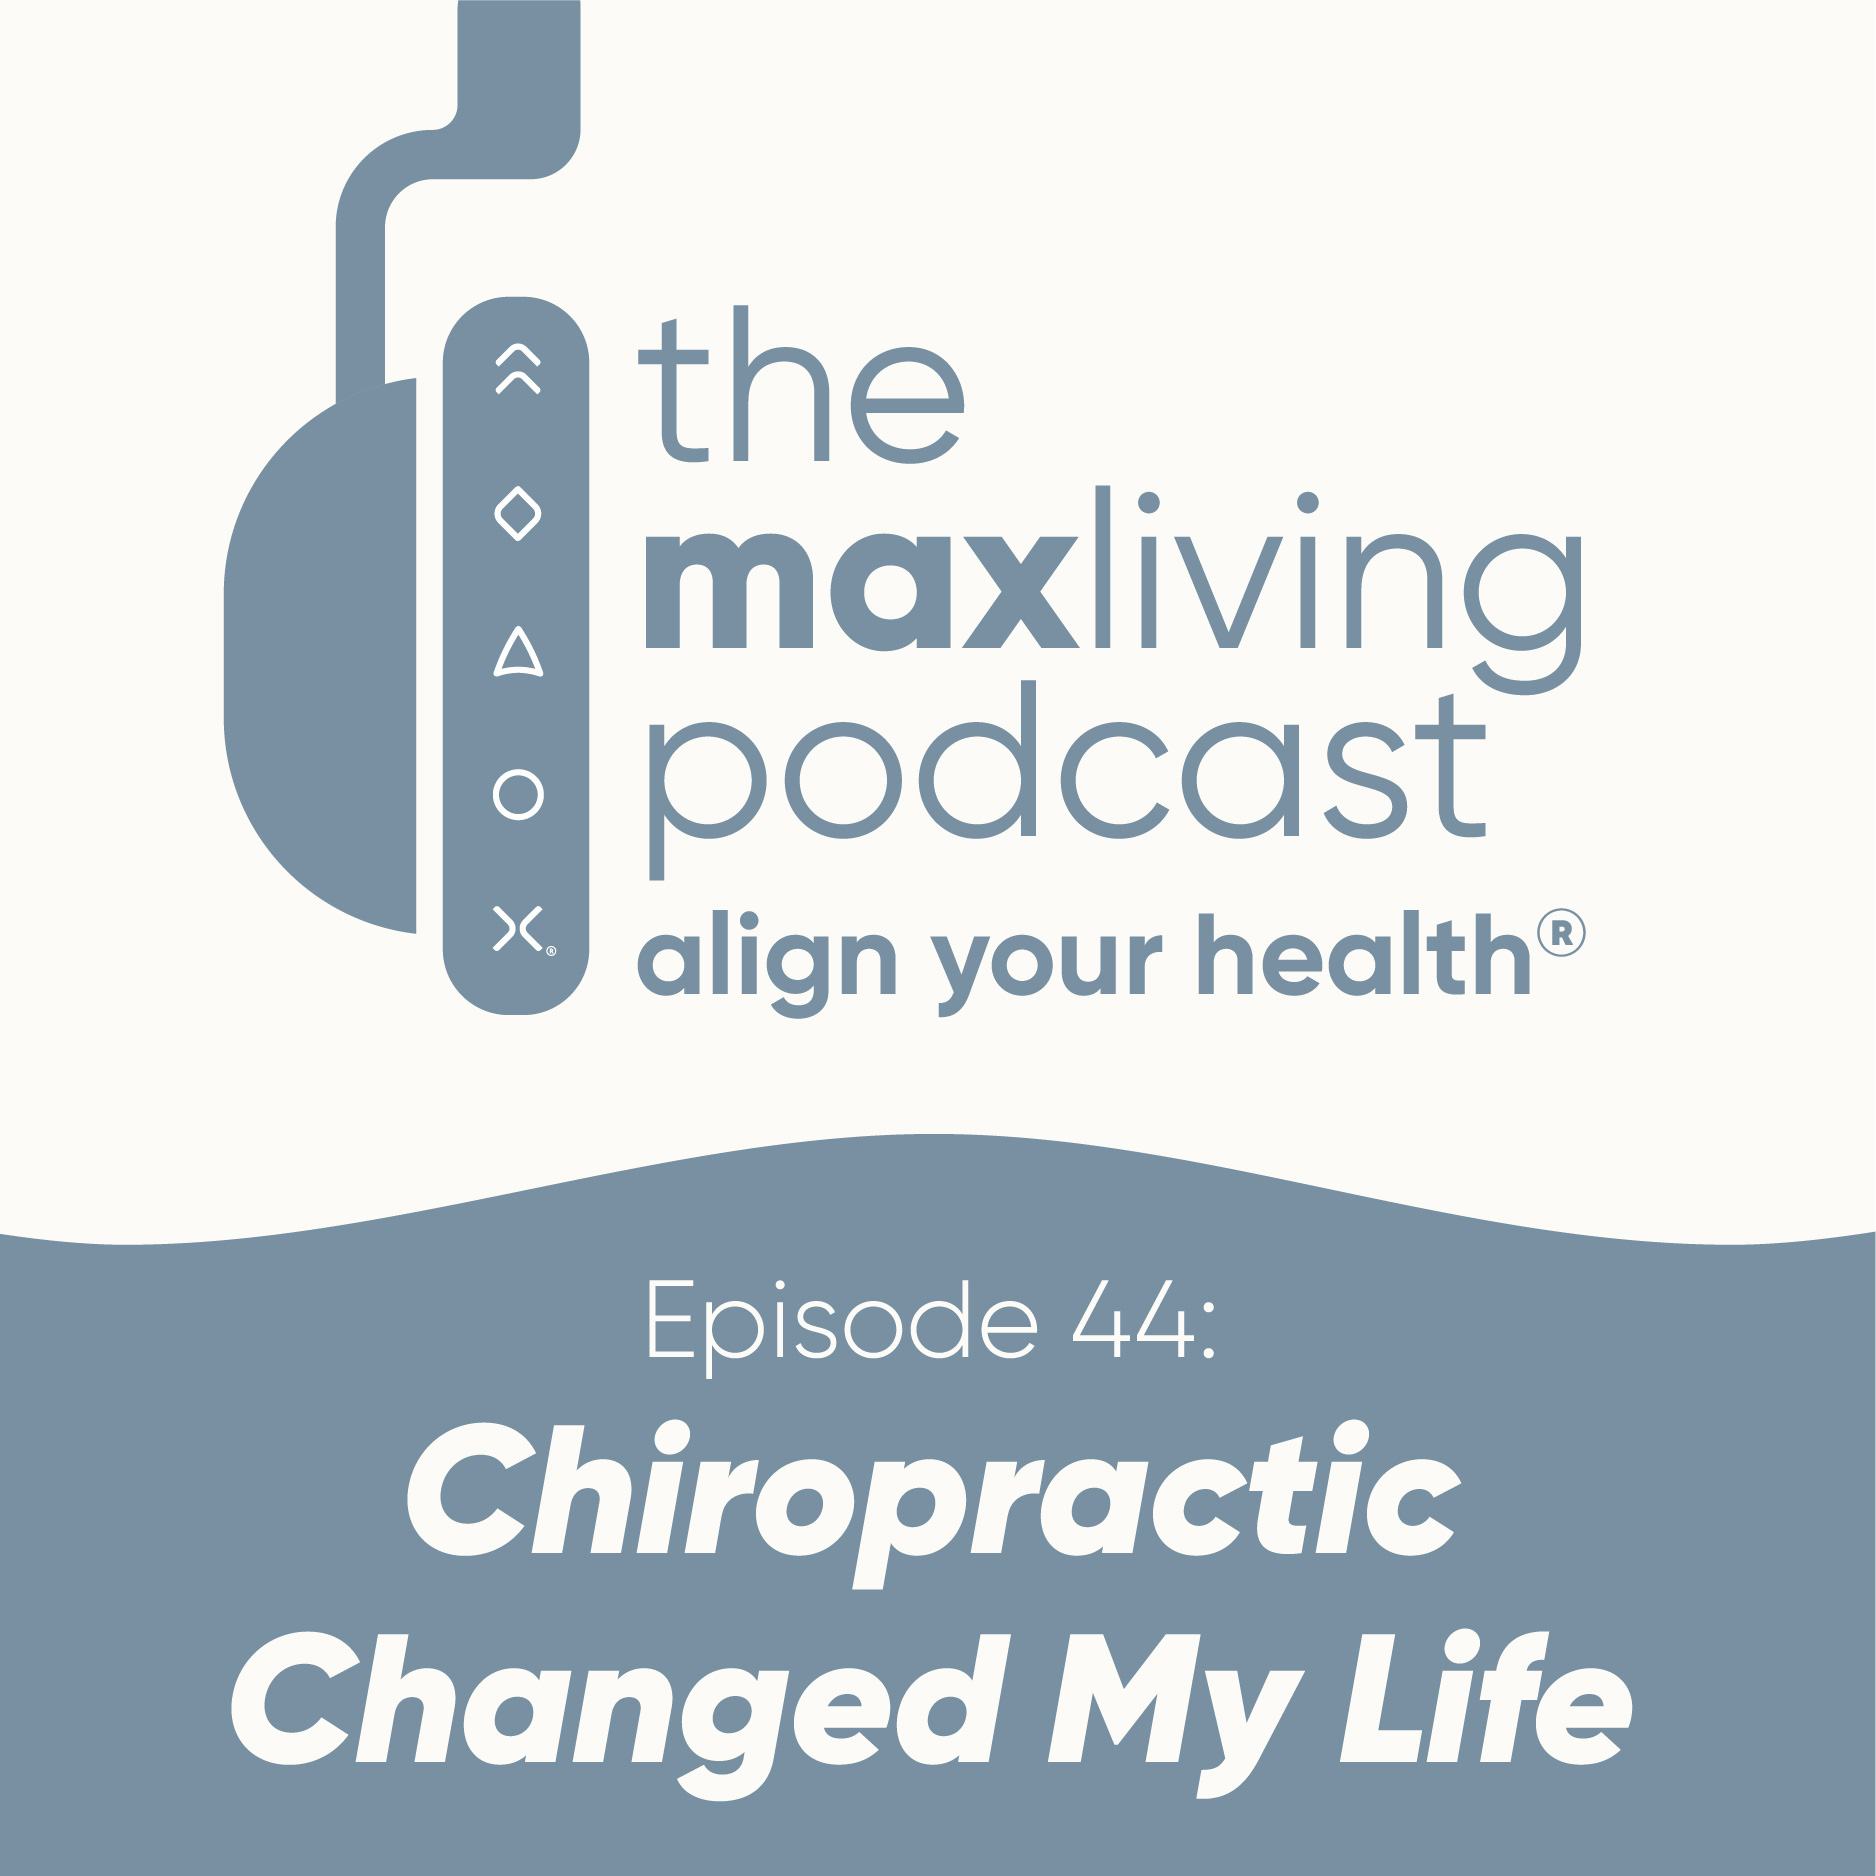 Episode 44 - Chiropractic Changed My Life